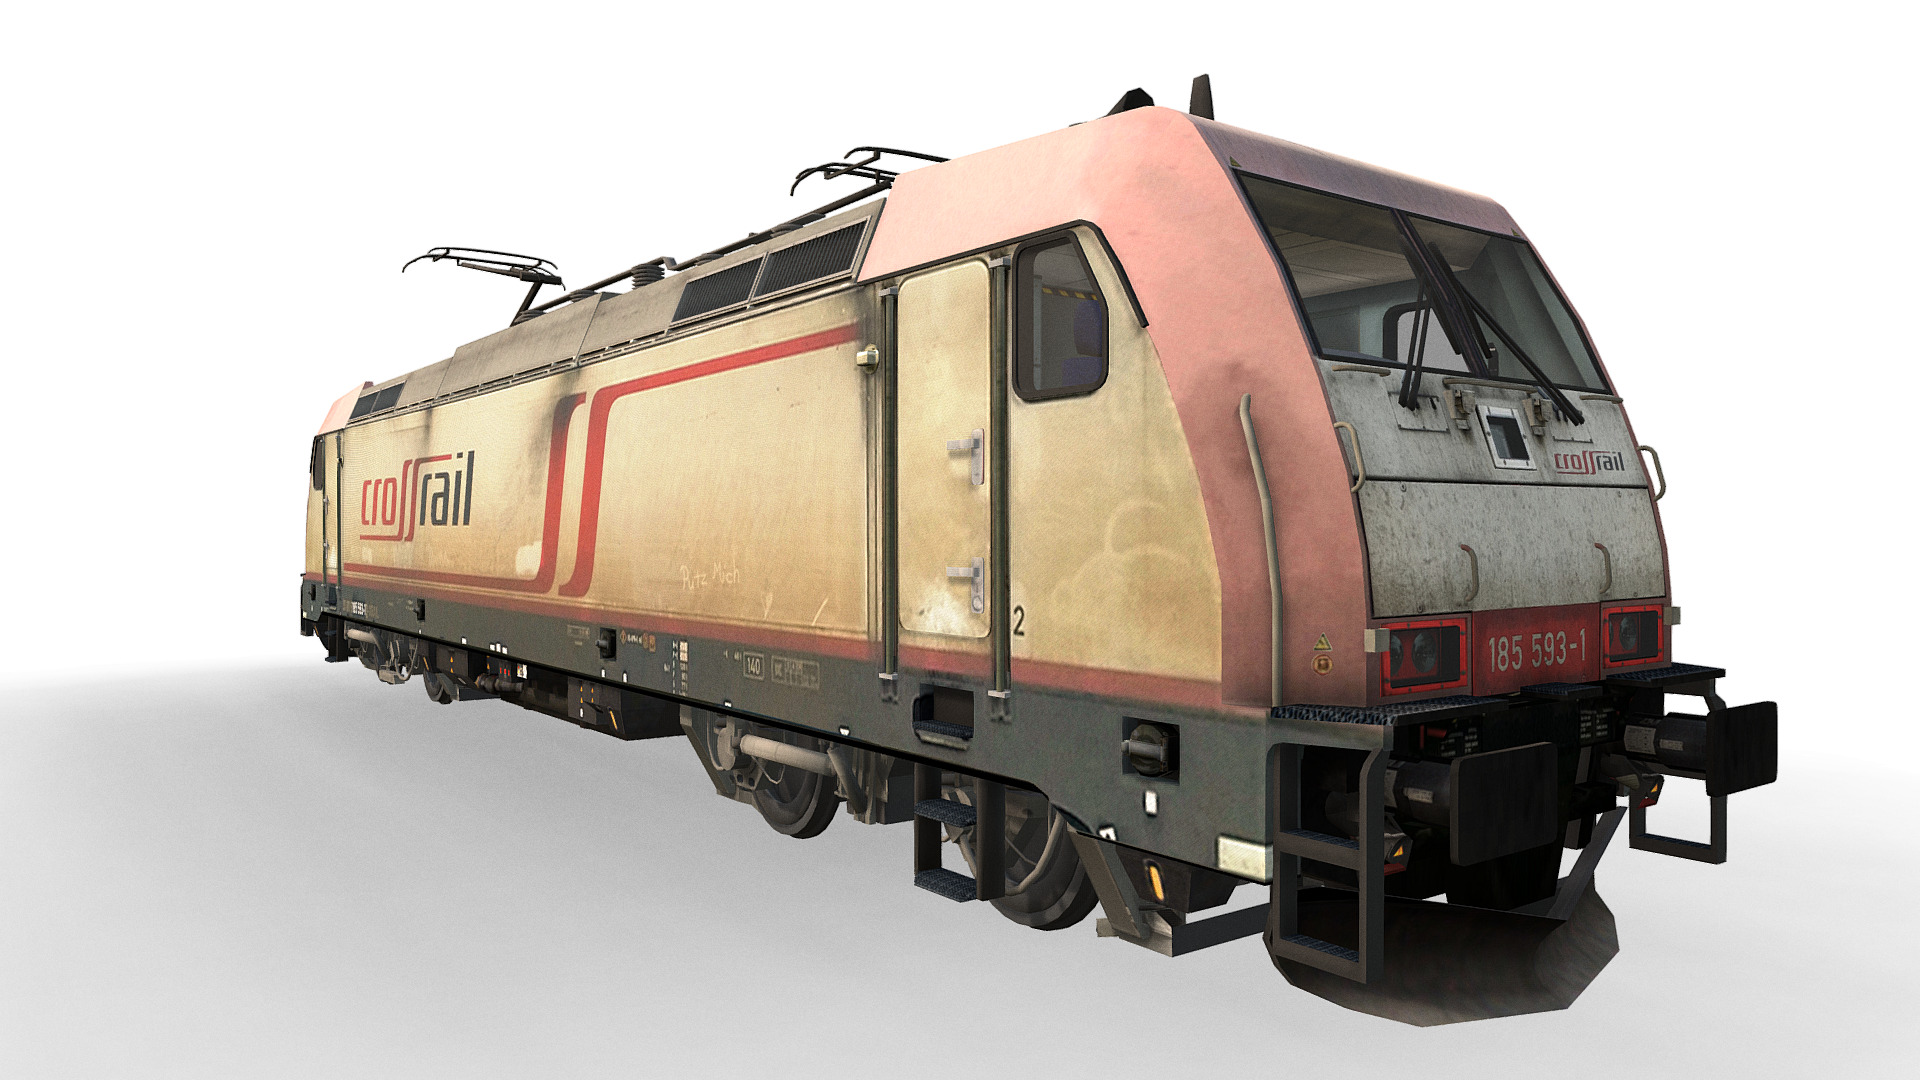 3D model Locomotive Class 185 593-1 – CrossRail - This is a 3D model of the Locomotive Class 185 593-1 - CrossRail. The 3D model is about a large red and white truck.